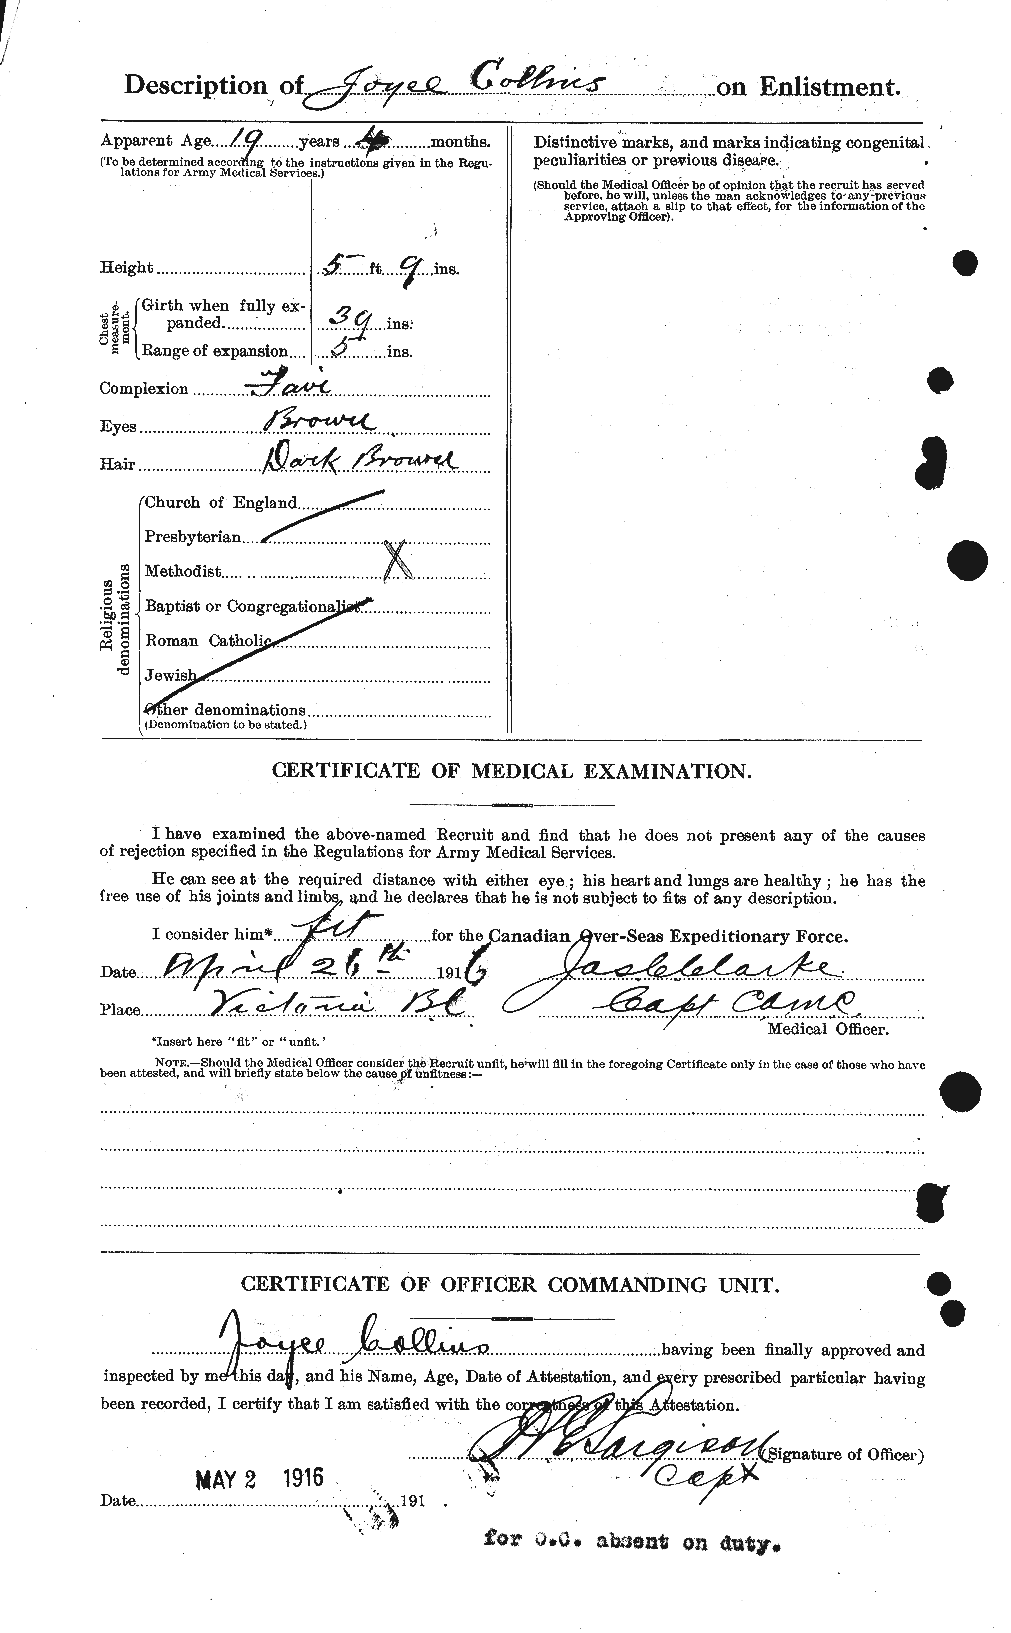 Personnel Records of the First World War - CEF 069507b